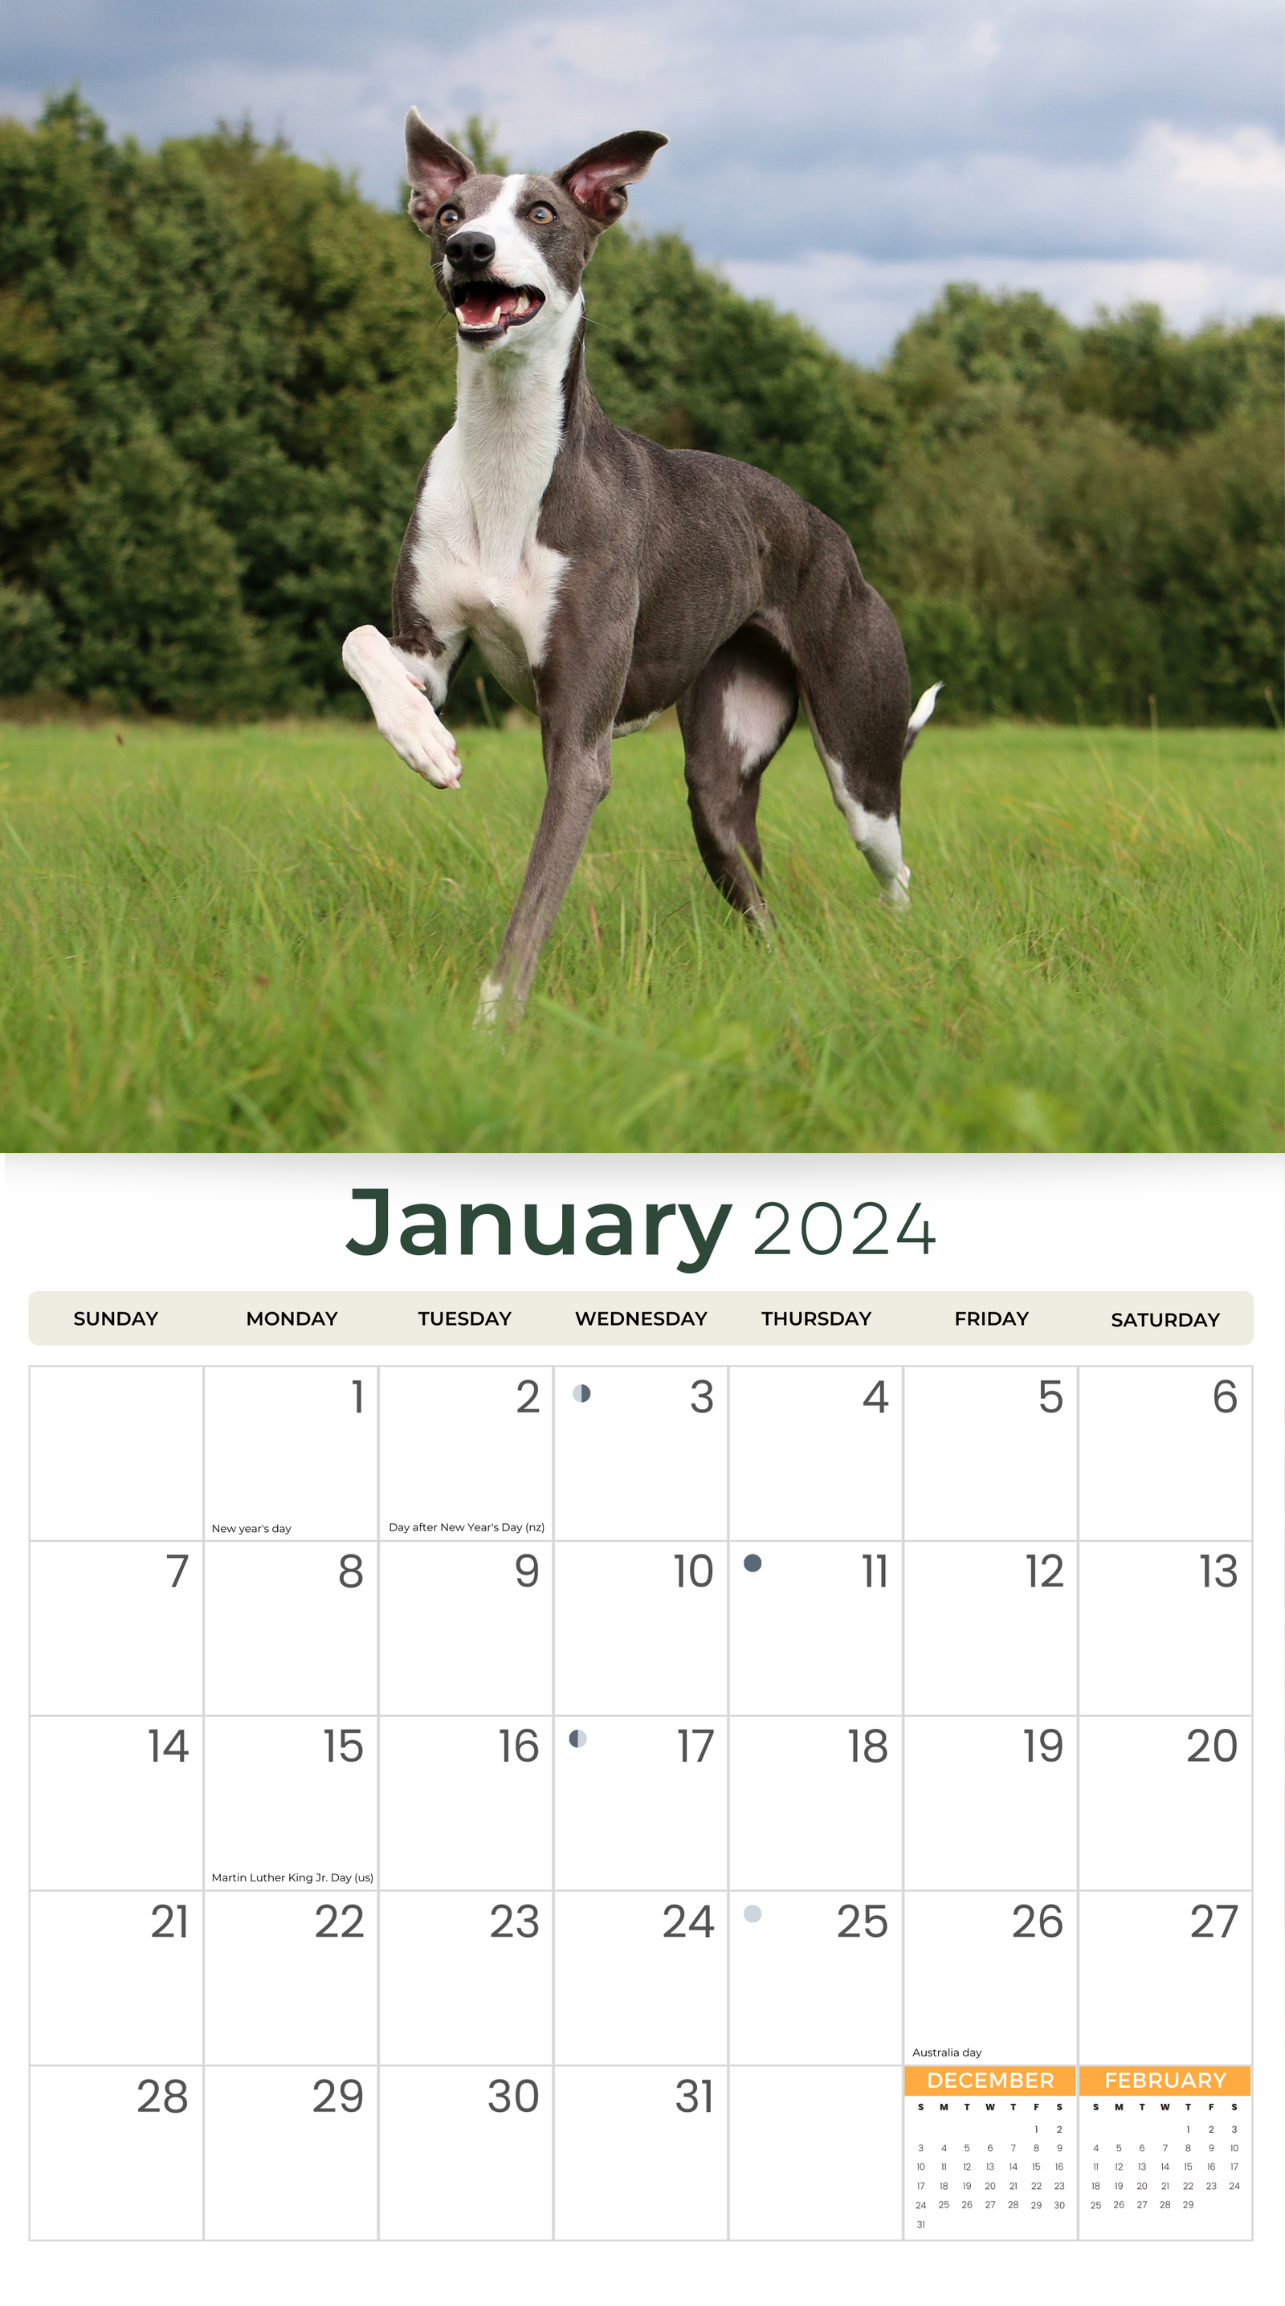 2024 Whippets Dogs & Puppies - Deluxe Wall Calendar by Just Calendars - 16 Month - Plastic Free